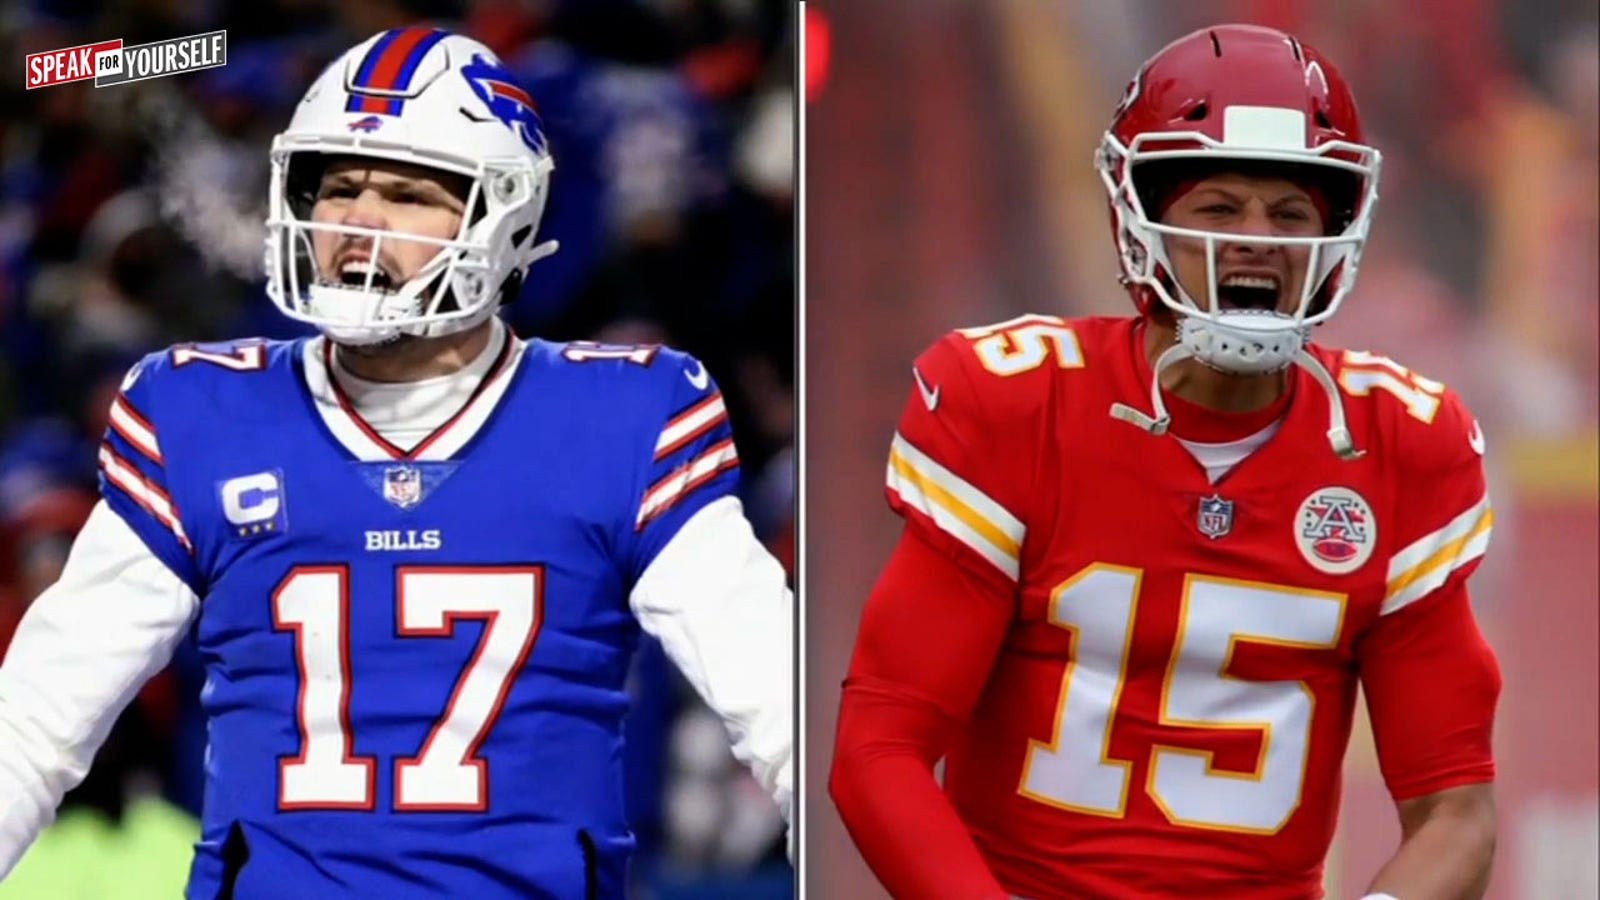 Marcellus Wiley: Allen better than Mahomes